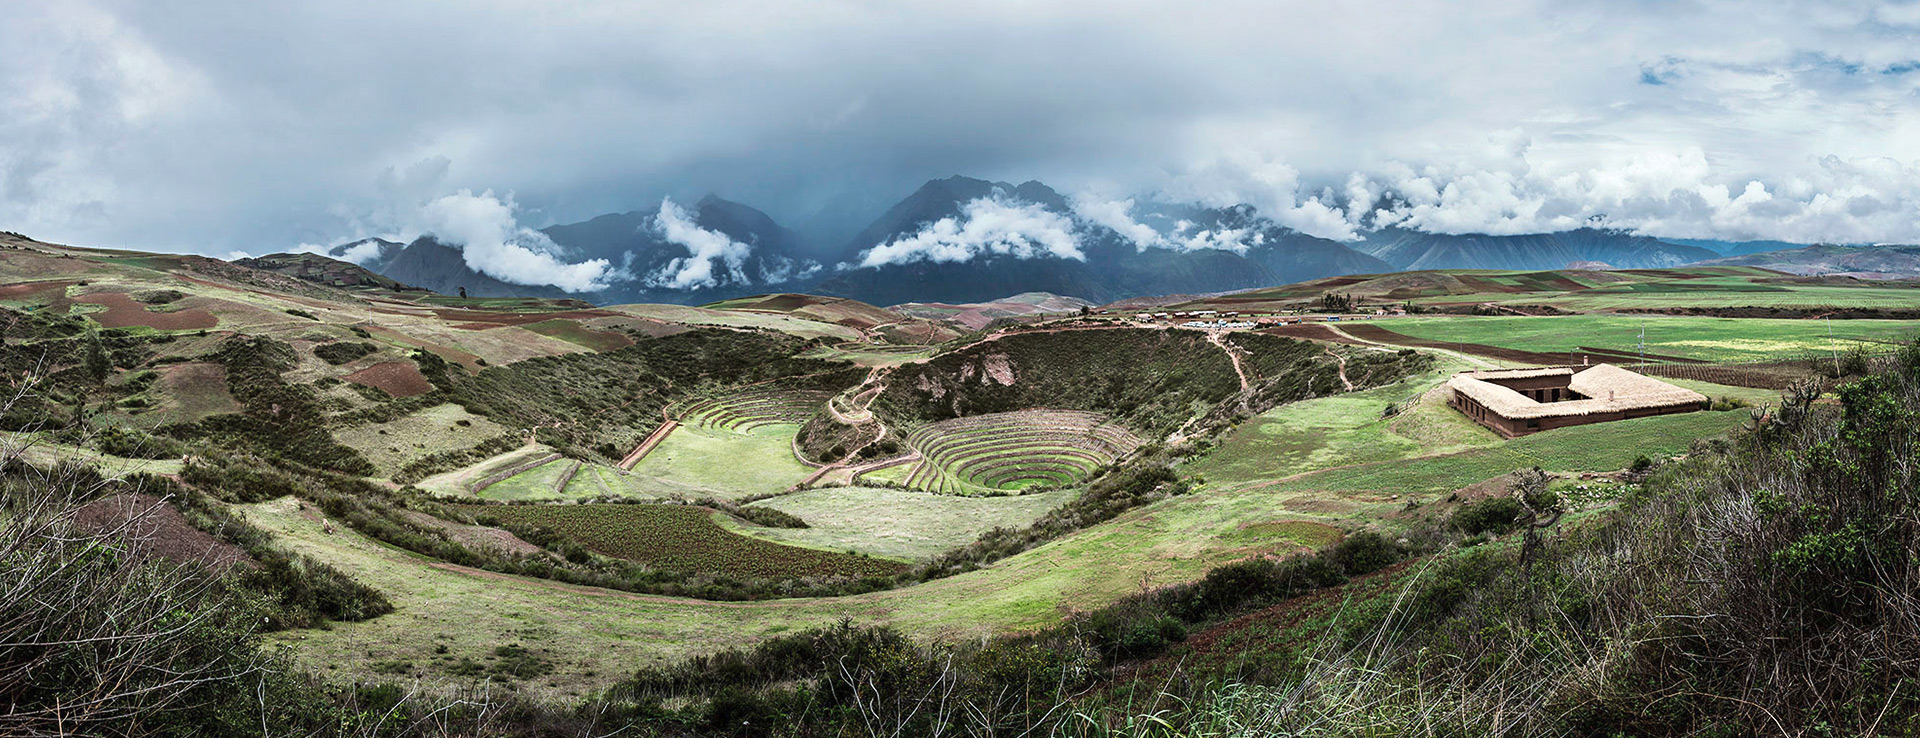 Inca ruins in Moray, Andean peaks in the background